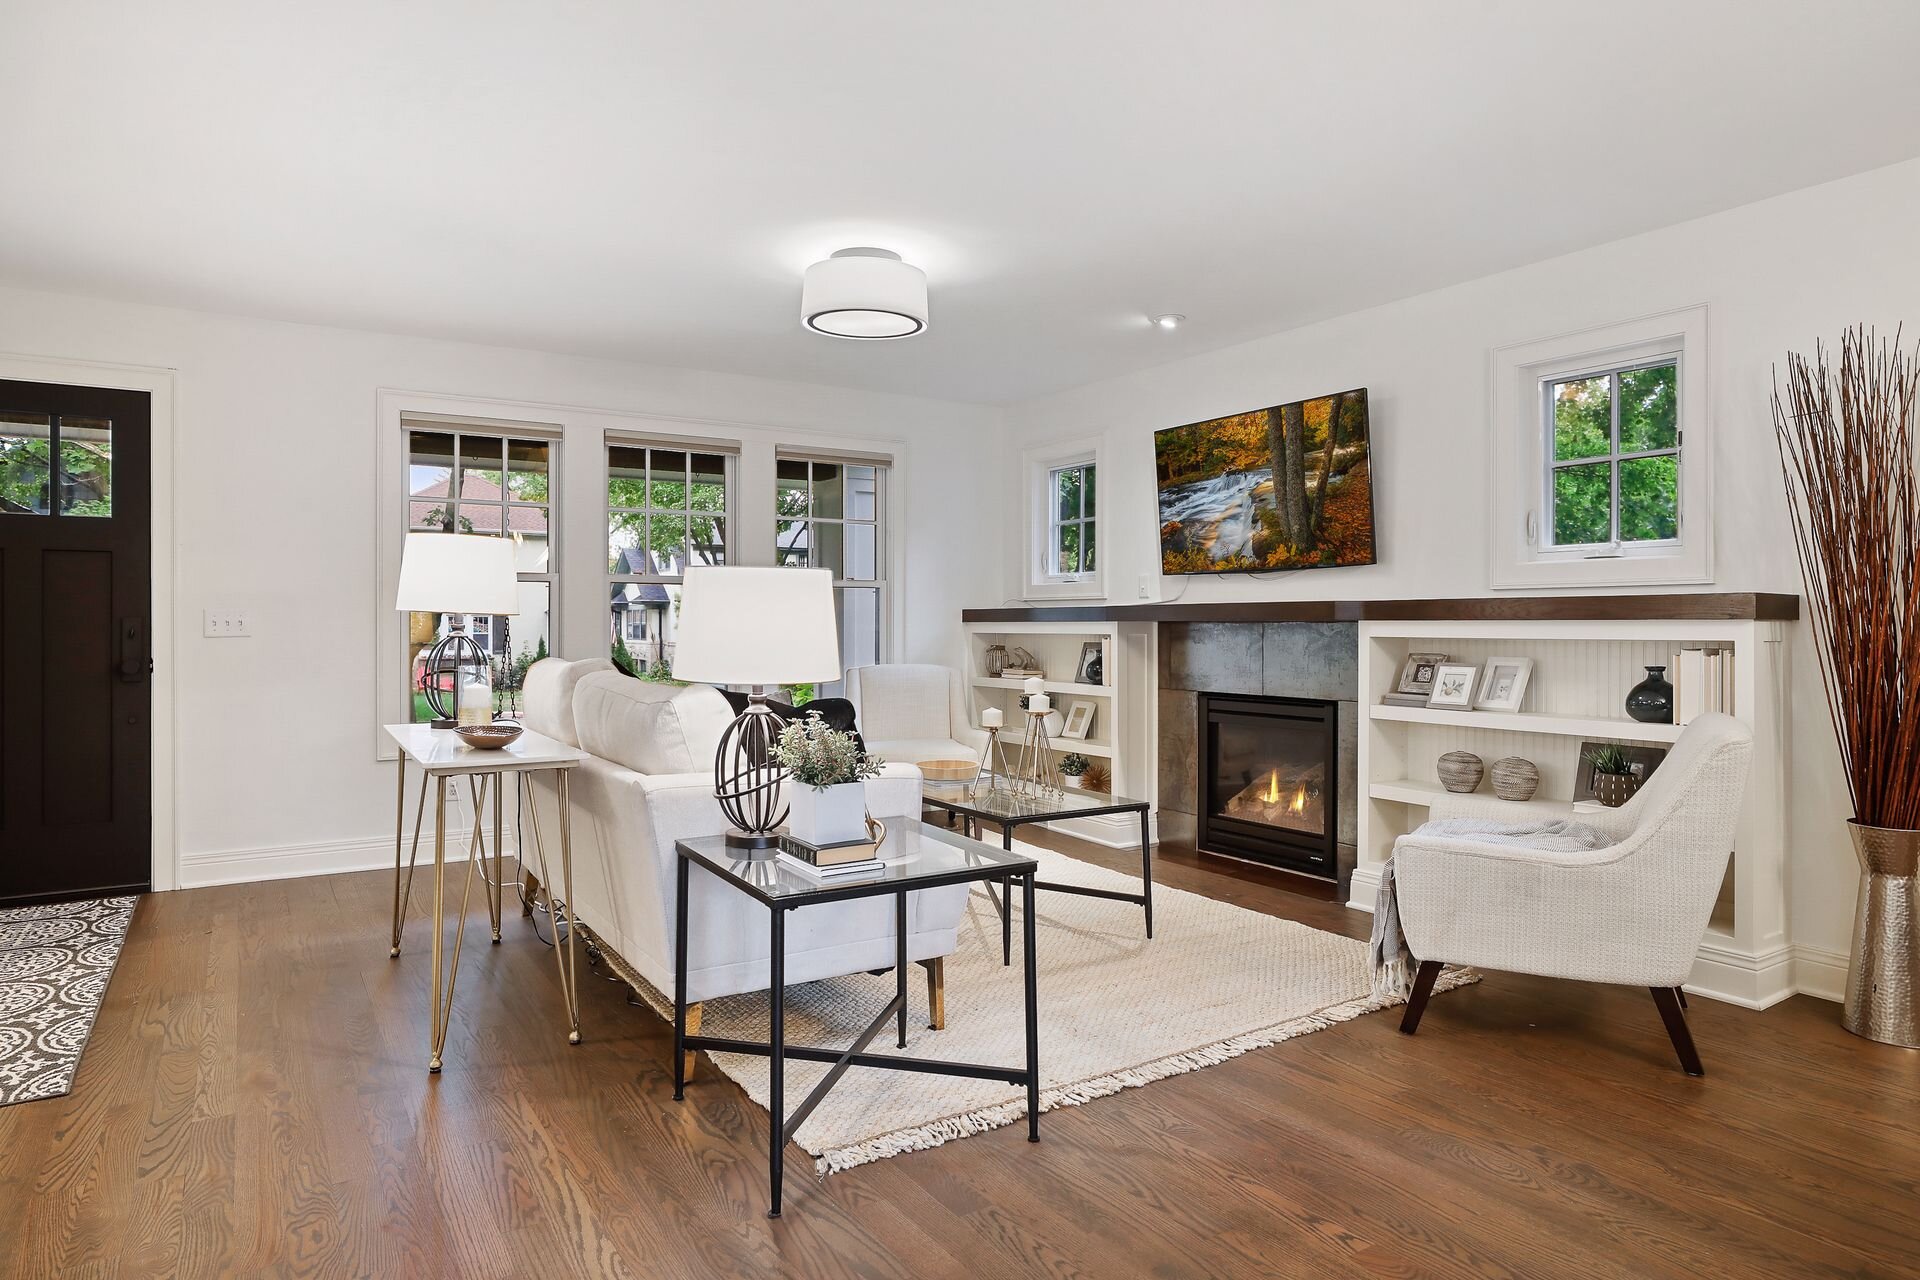 11 Main floor living room includes low-key built in shelve and a gase fireplace.jpg